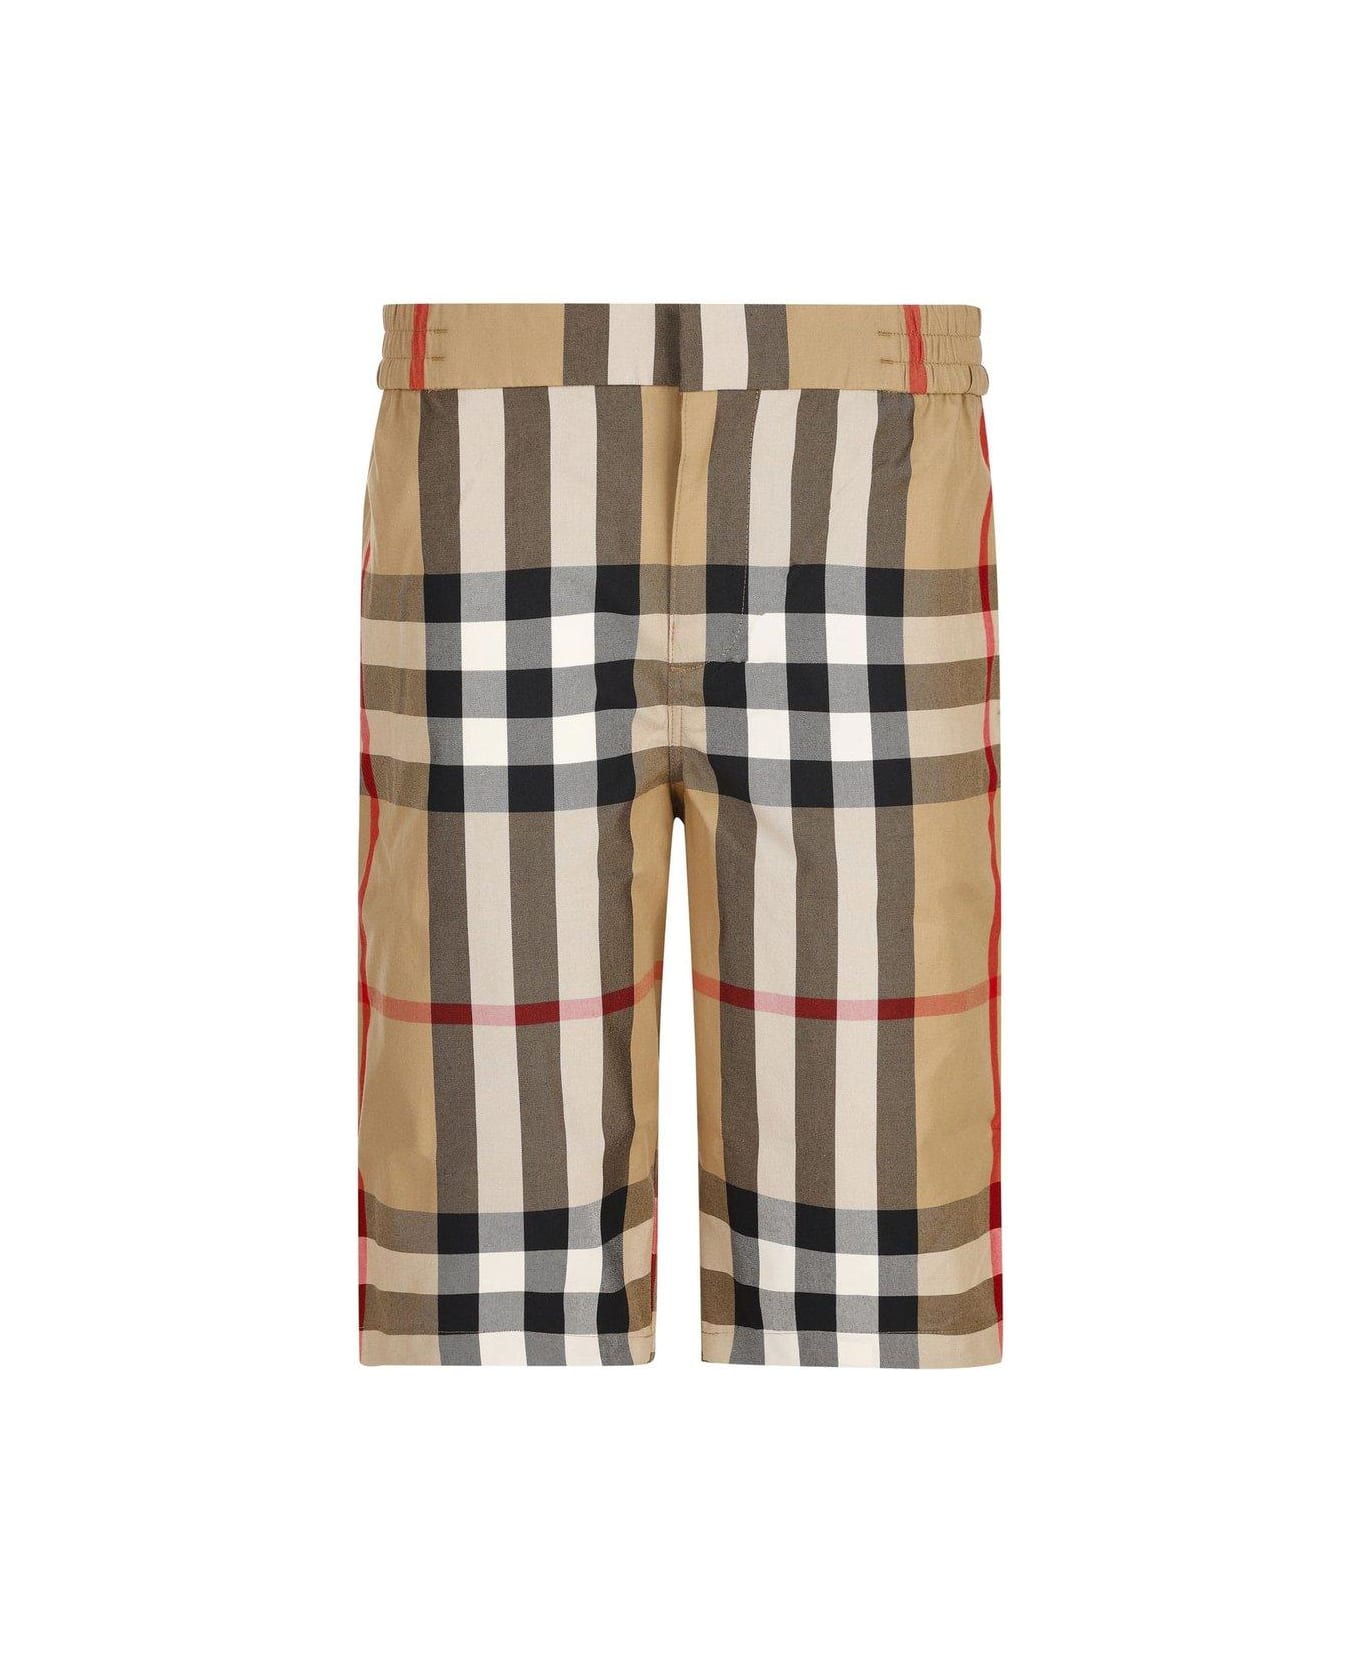 Burberry Checked Shorts - Archive beige ip chk